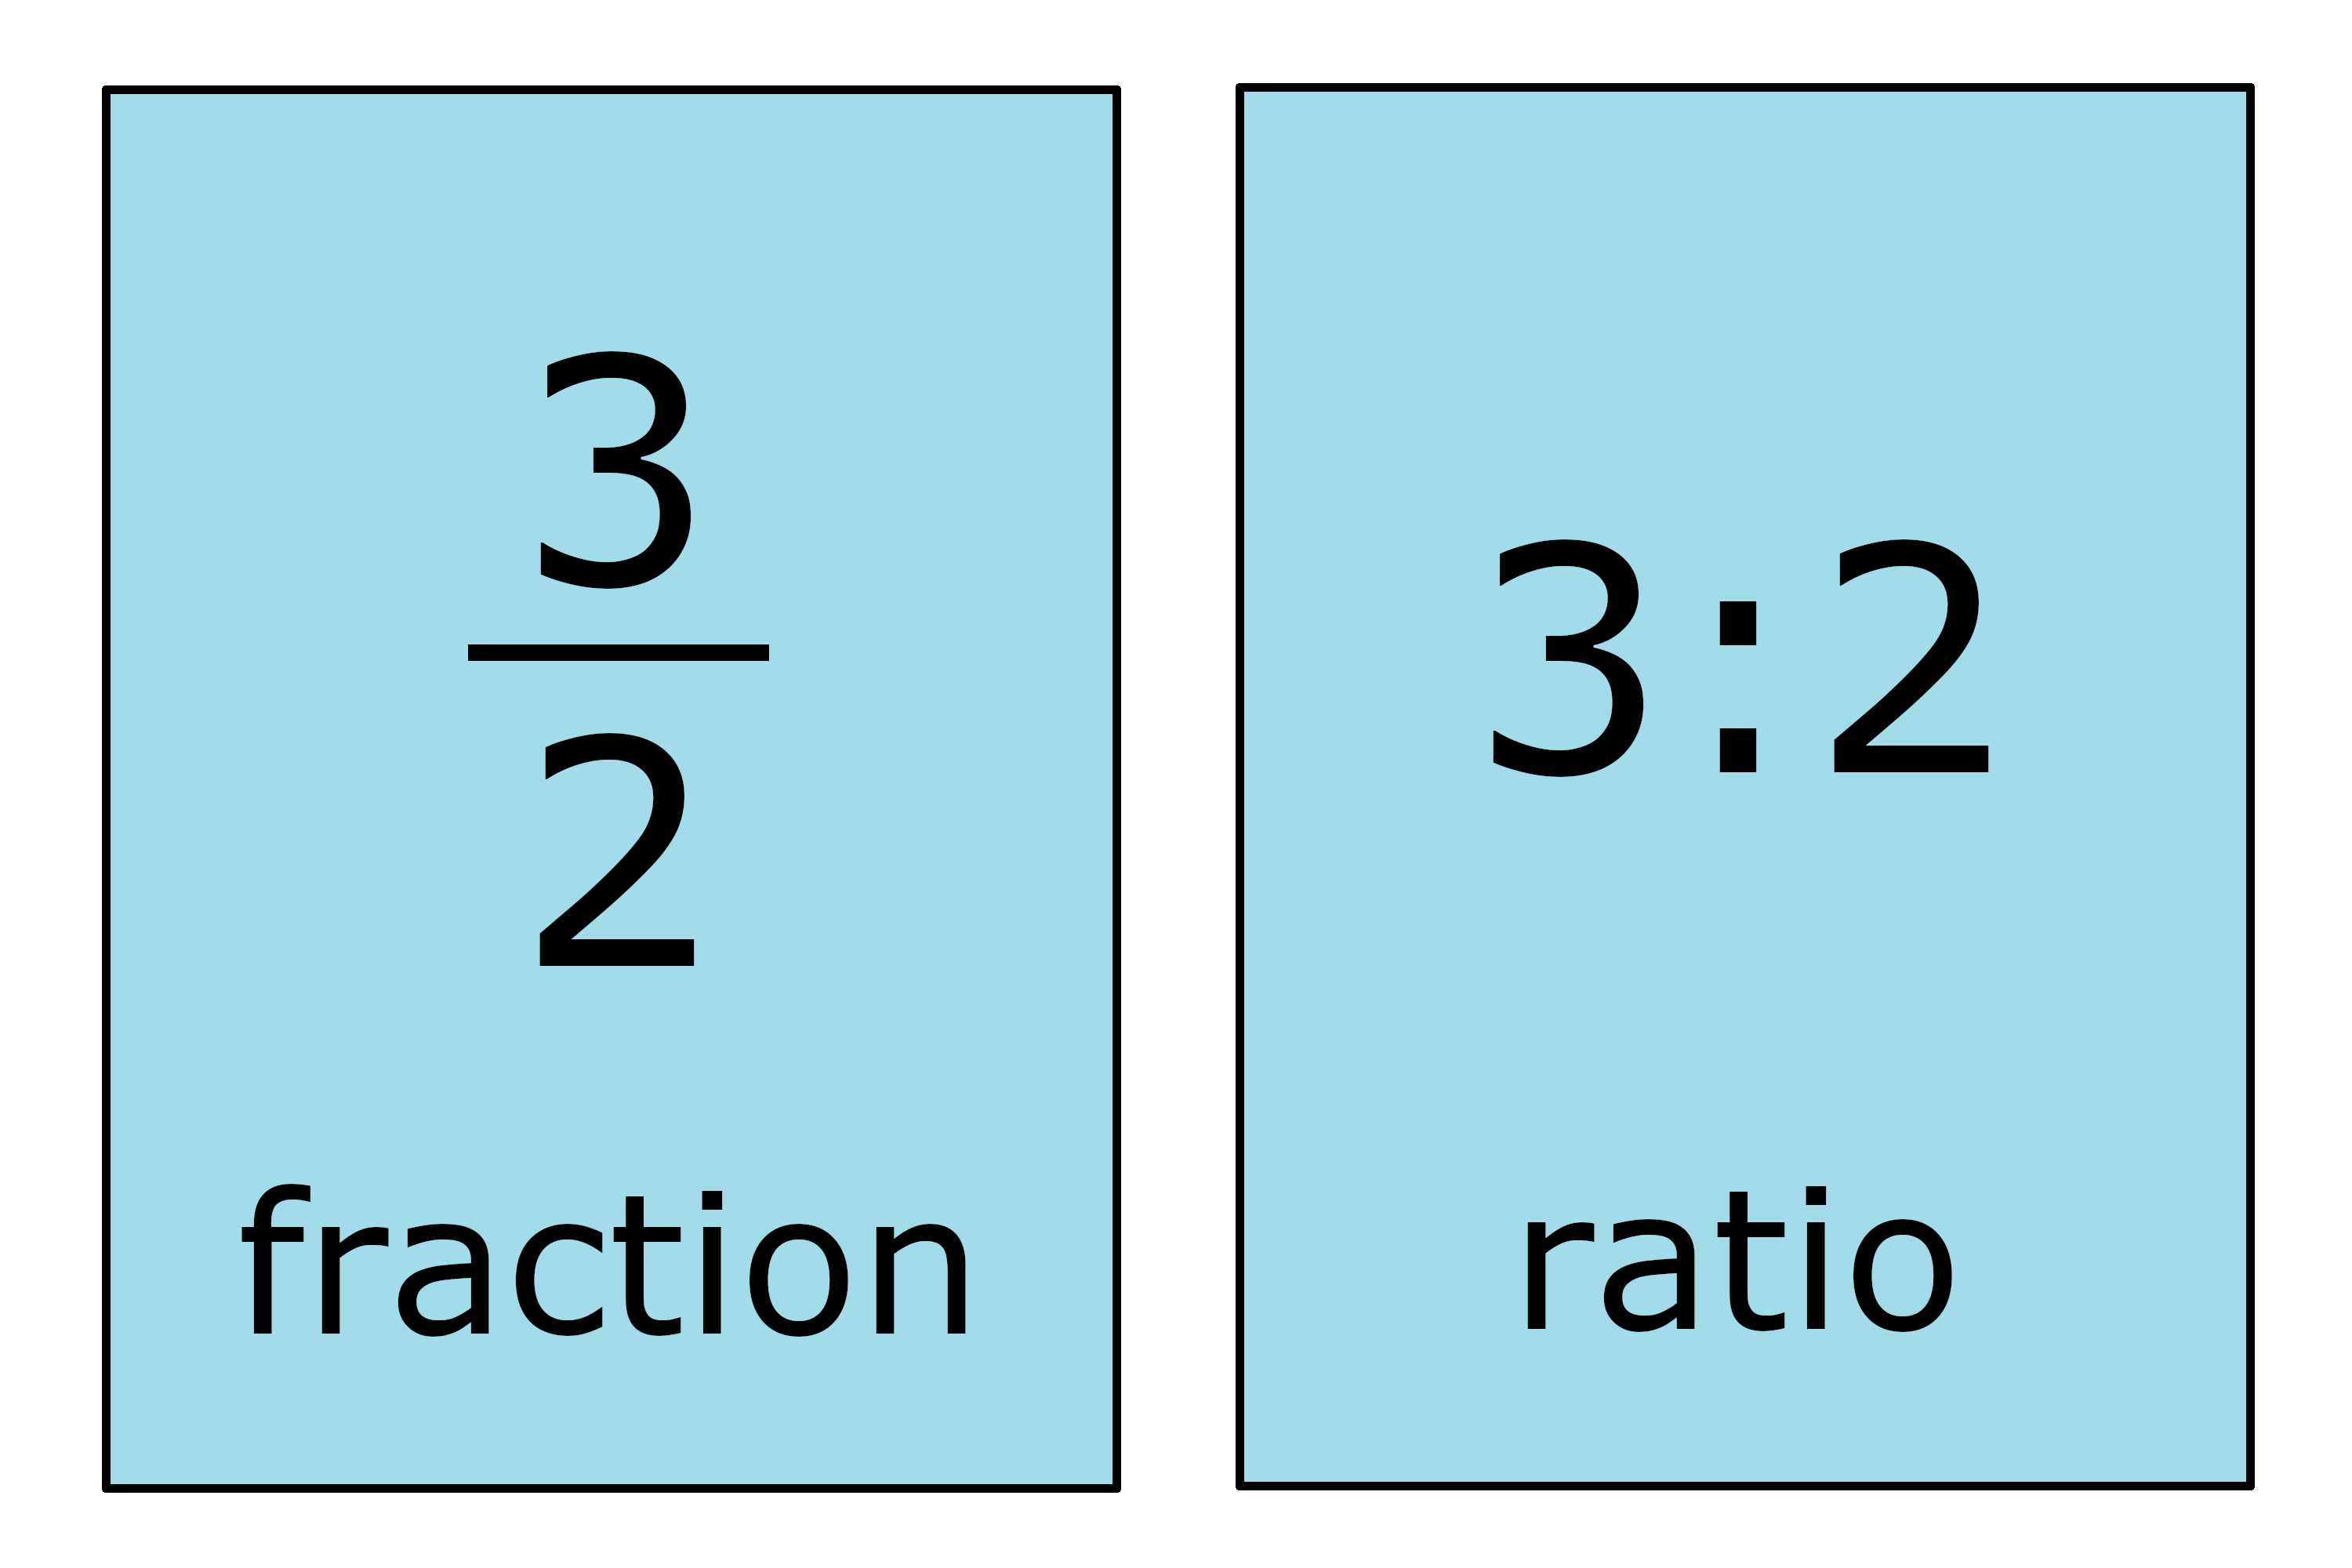 image showing the fraction 3/2 being equal to the ratio 3:2